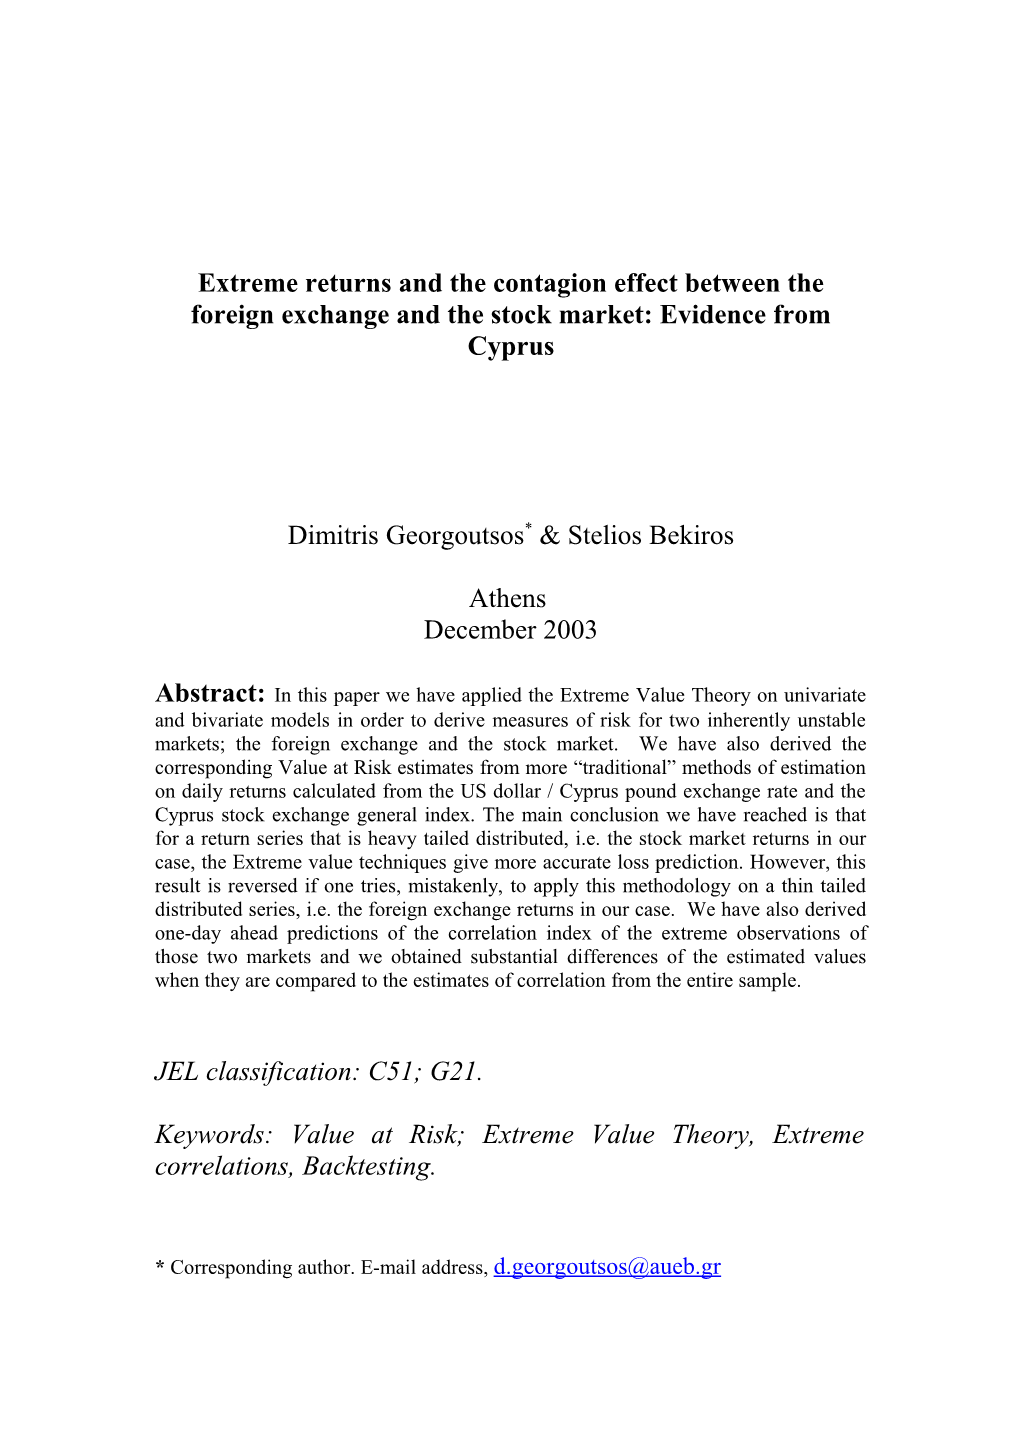 Extreme Returns and Contagion Between the Foreign Exchange and the Stock Market: Evidence